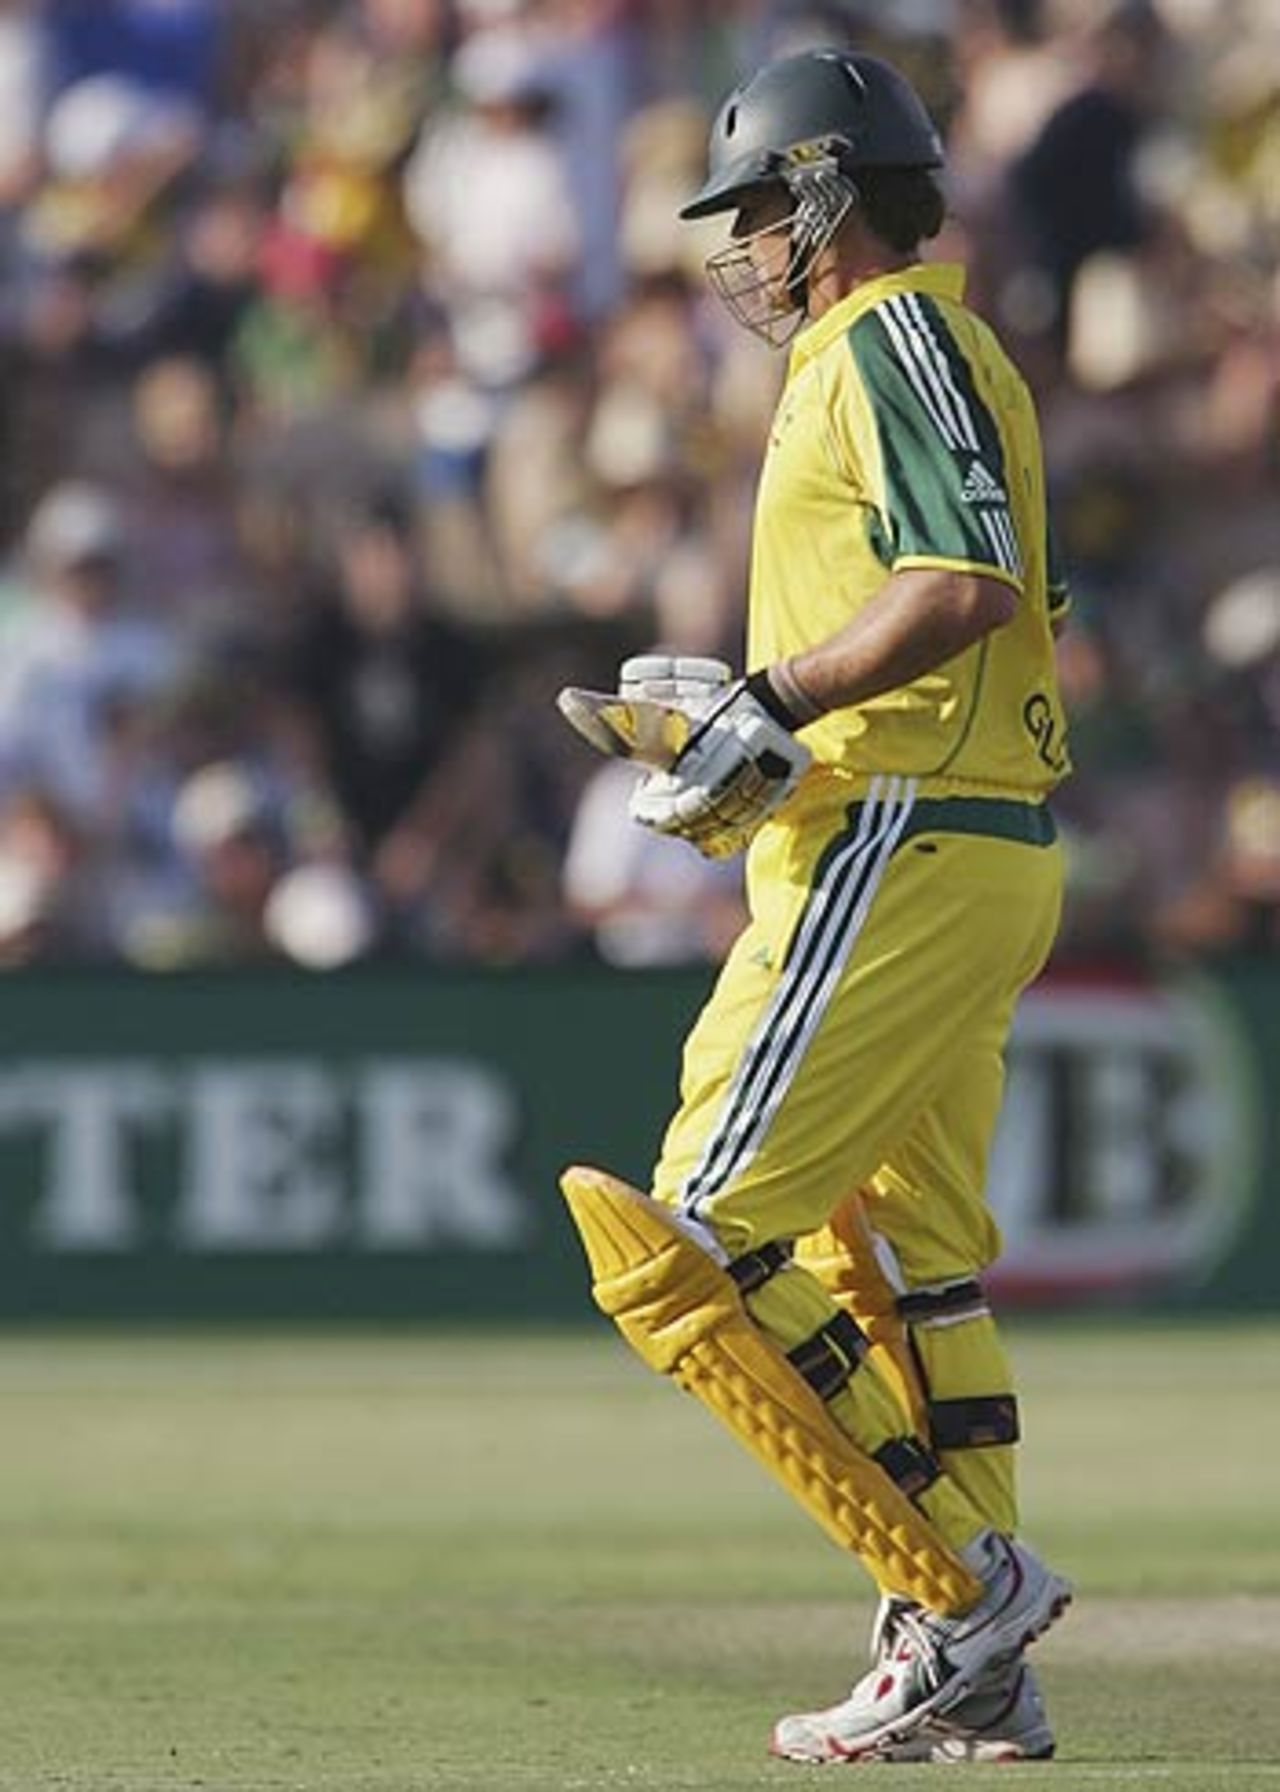 Adam Gilchrist walks back after chipping one to mid-off, Australia v Sri Lanka, 7th match, VB Series, Adelaide, January 26, 2006